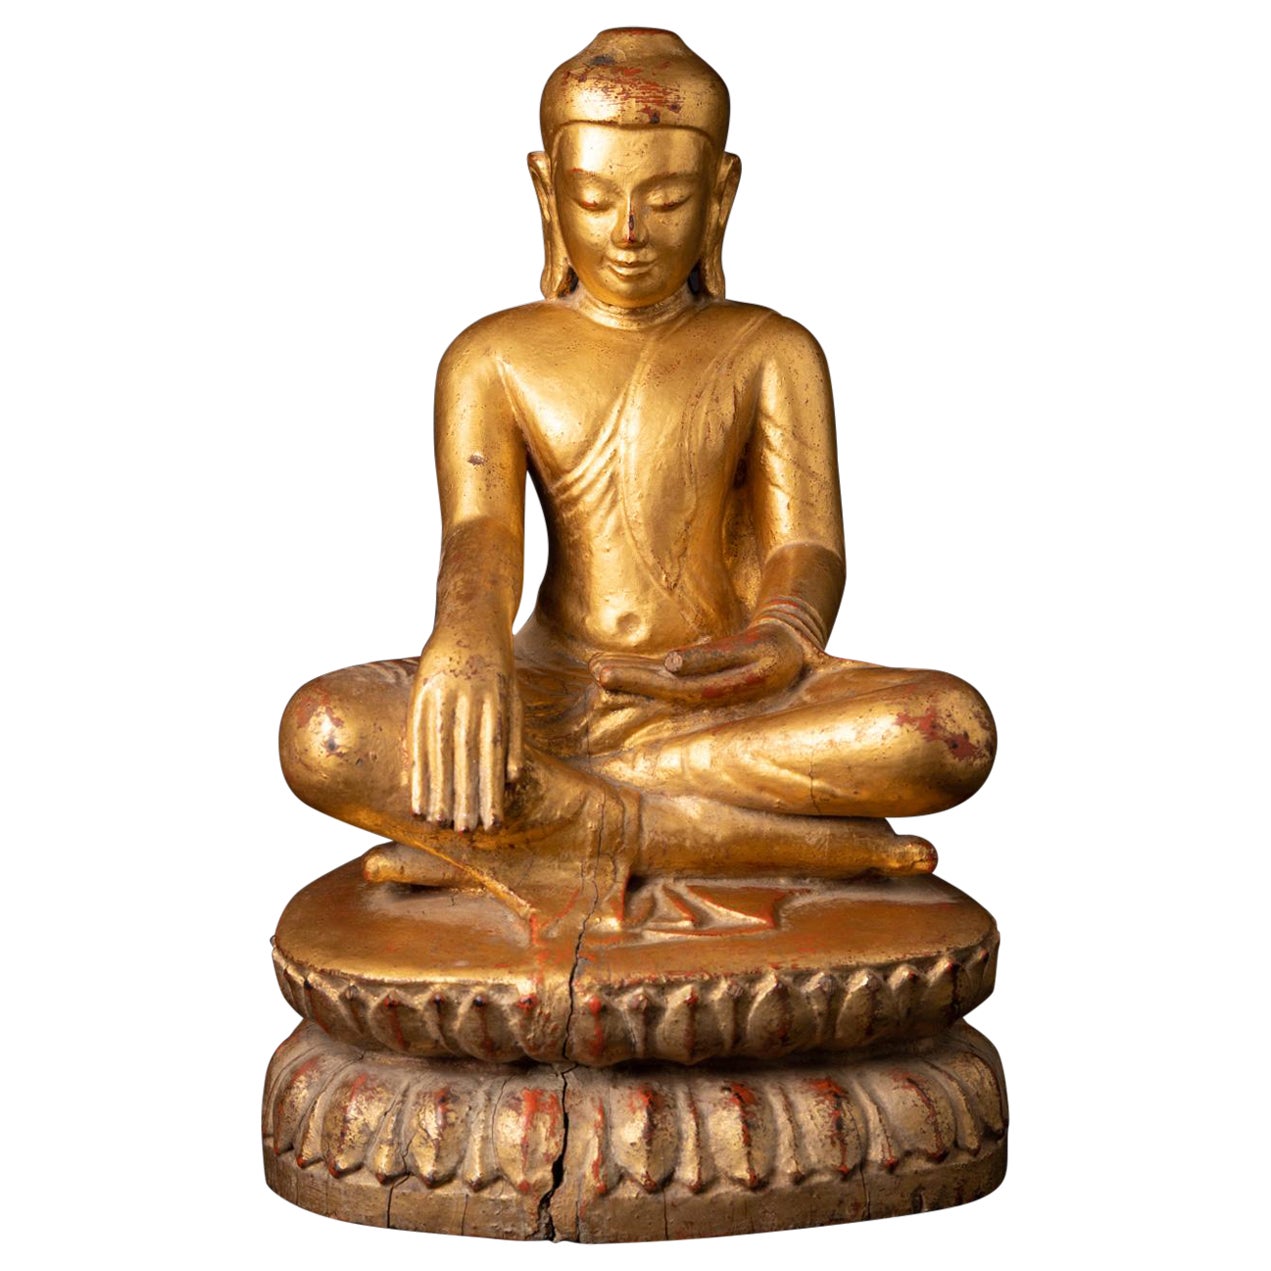 17th century special antique wooden Burmese Buddha statue in Bhumisparsha Mudra For Sale